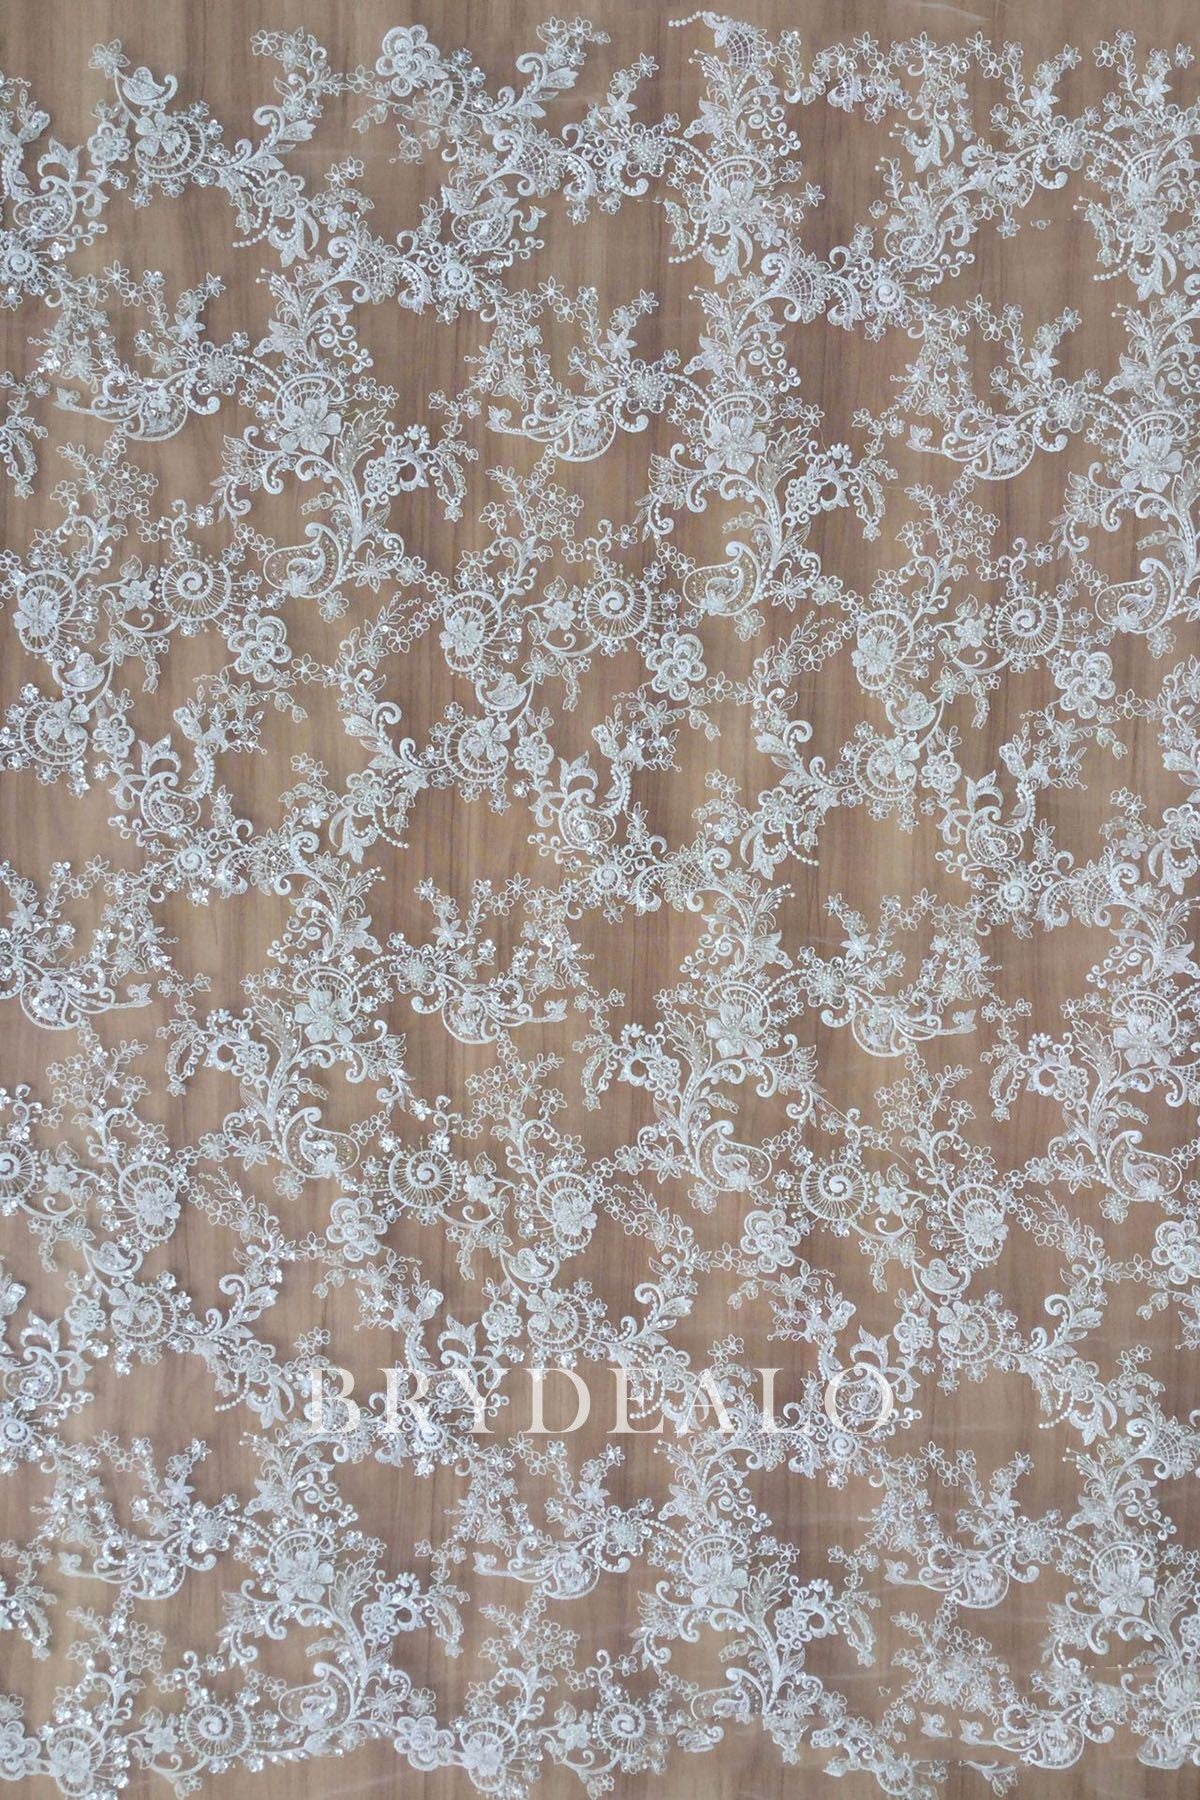 Designer Beaded Unrestrained Embroidered Lace Fabric